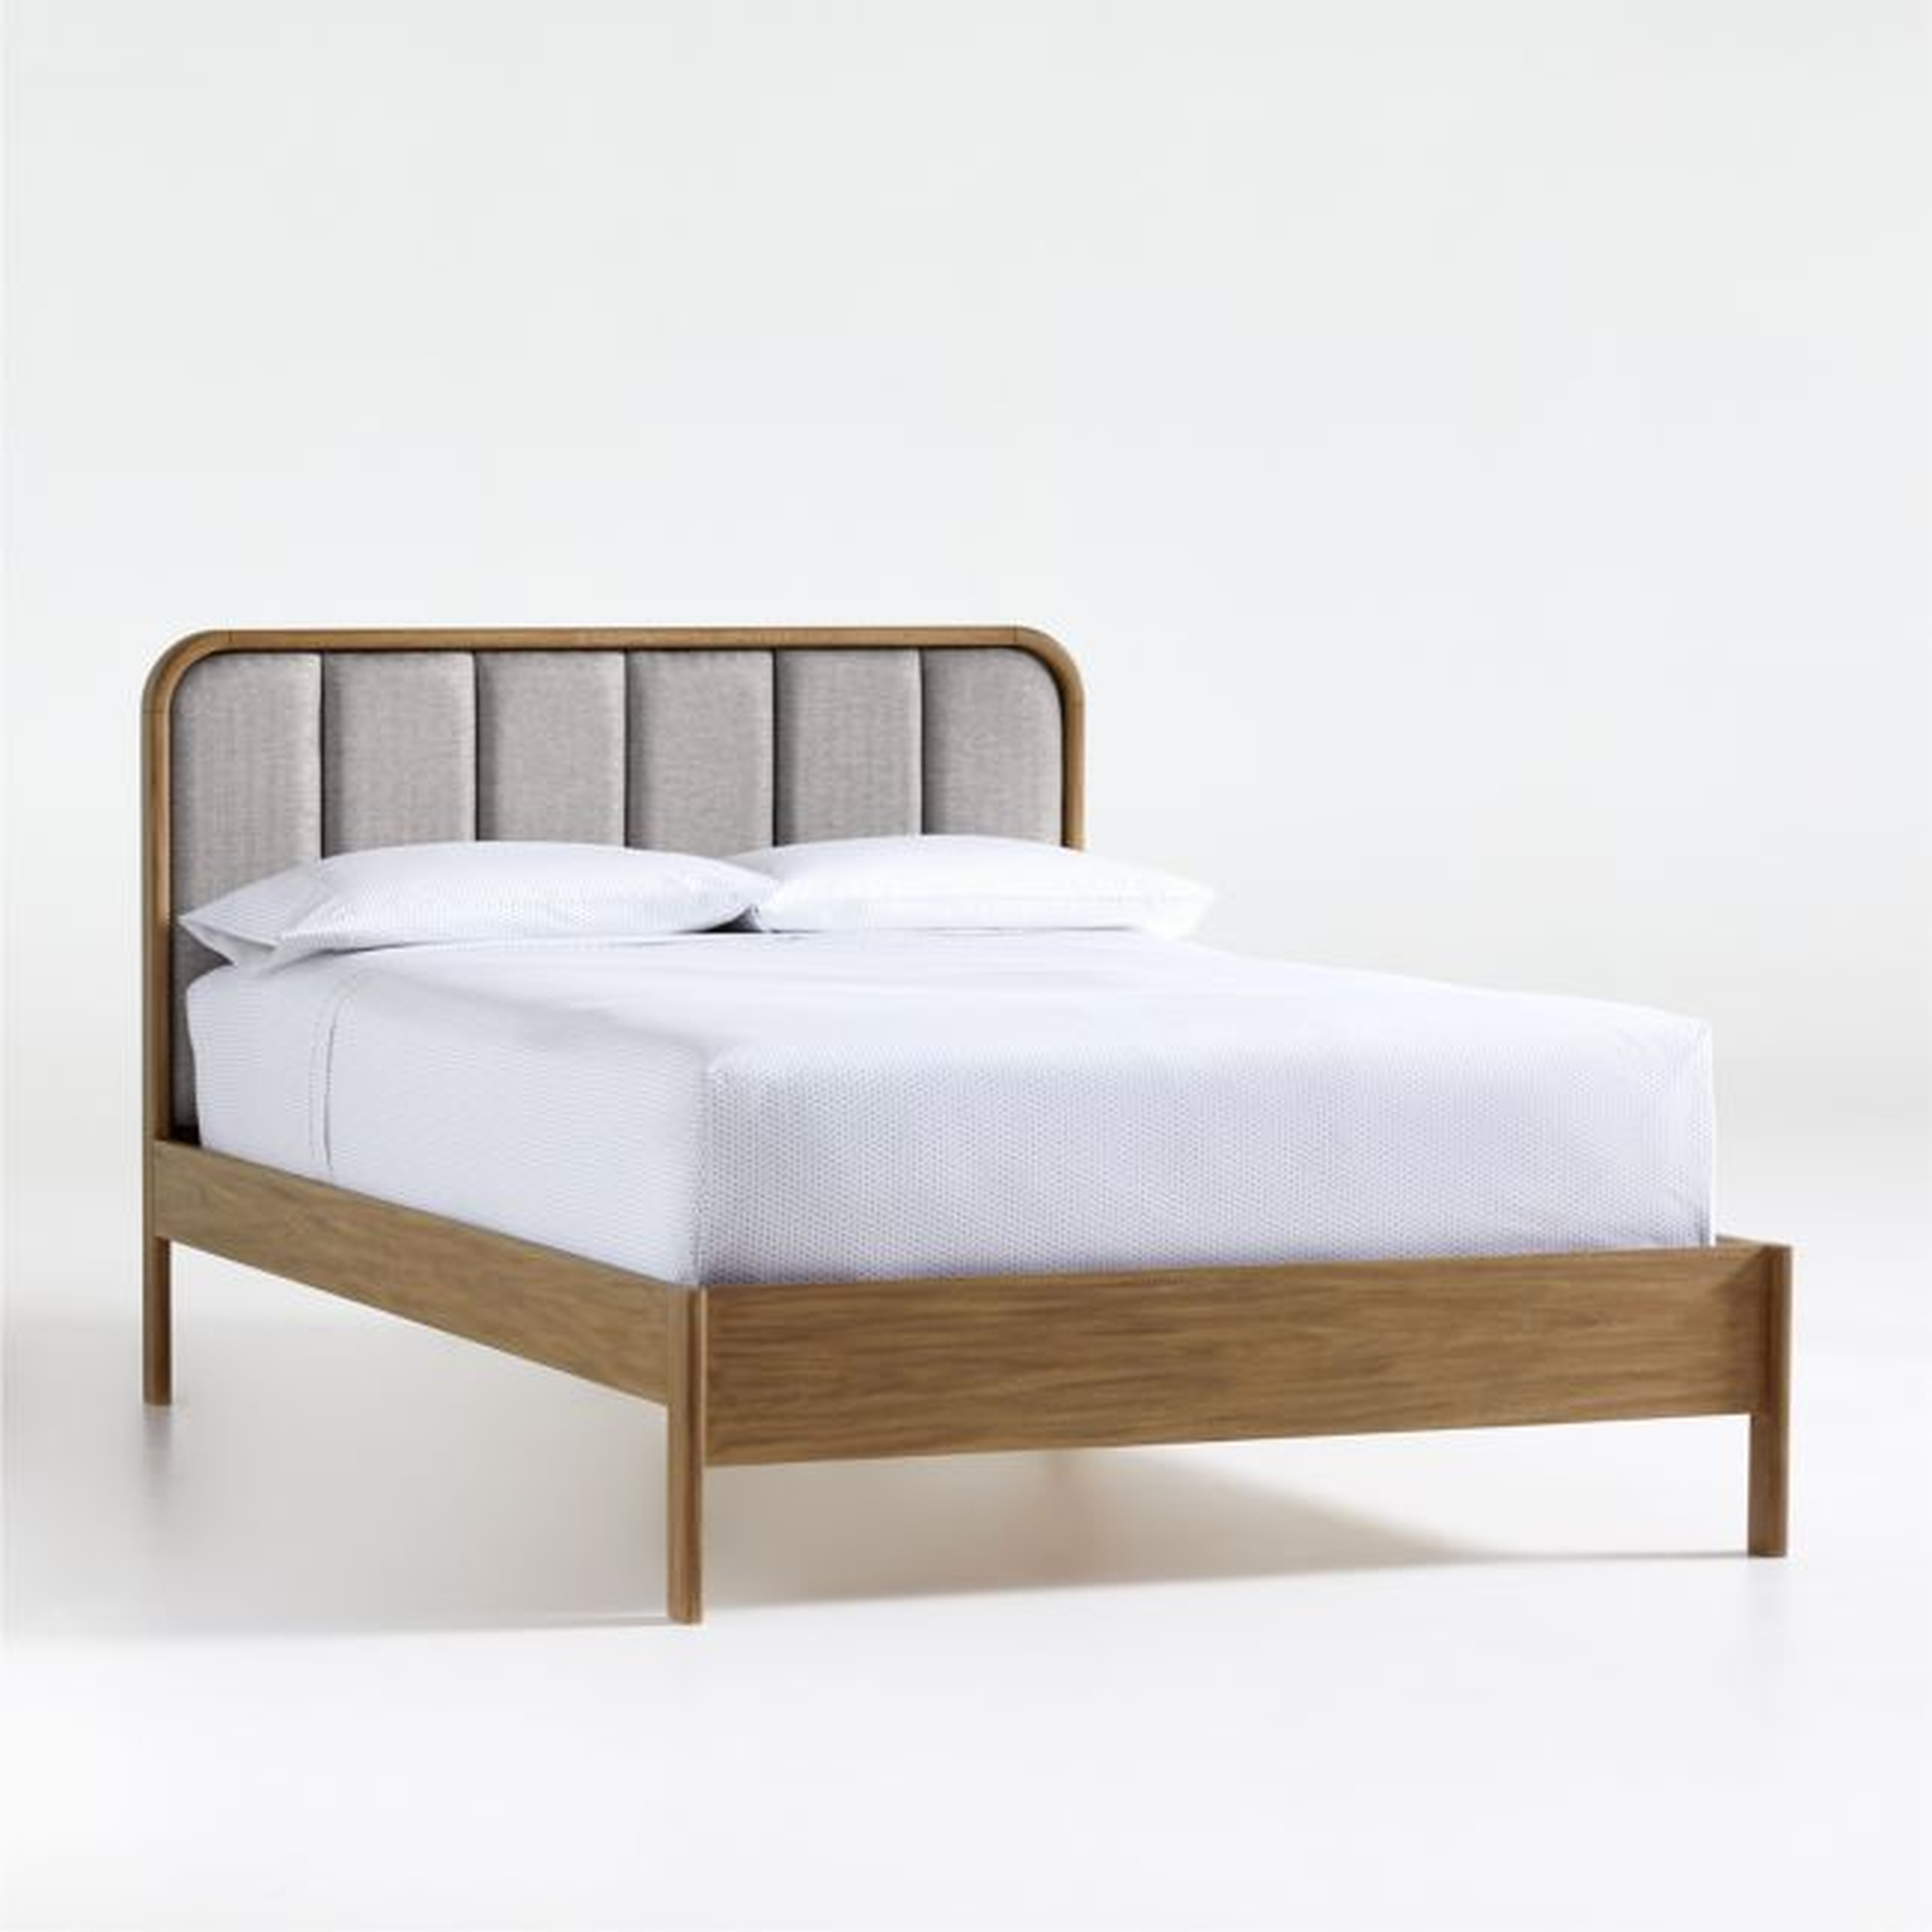 Wes Full Upholstered Wood Bed - Crate and Barrel